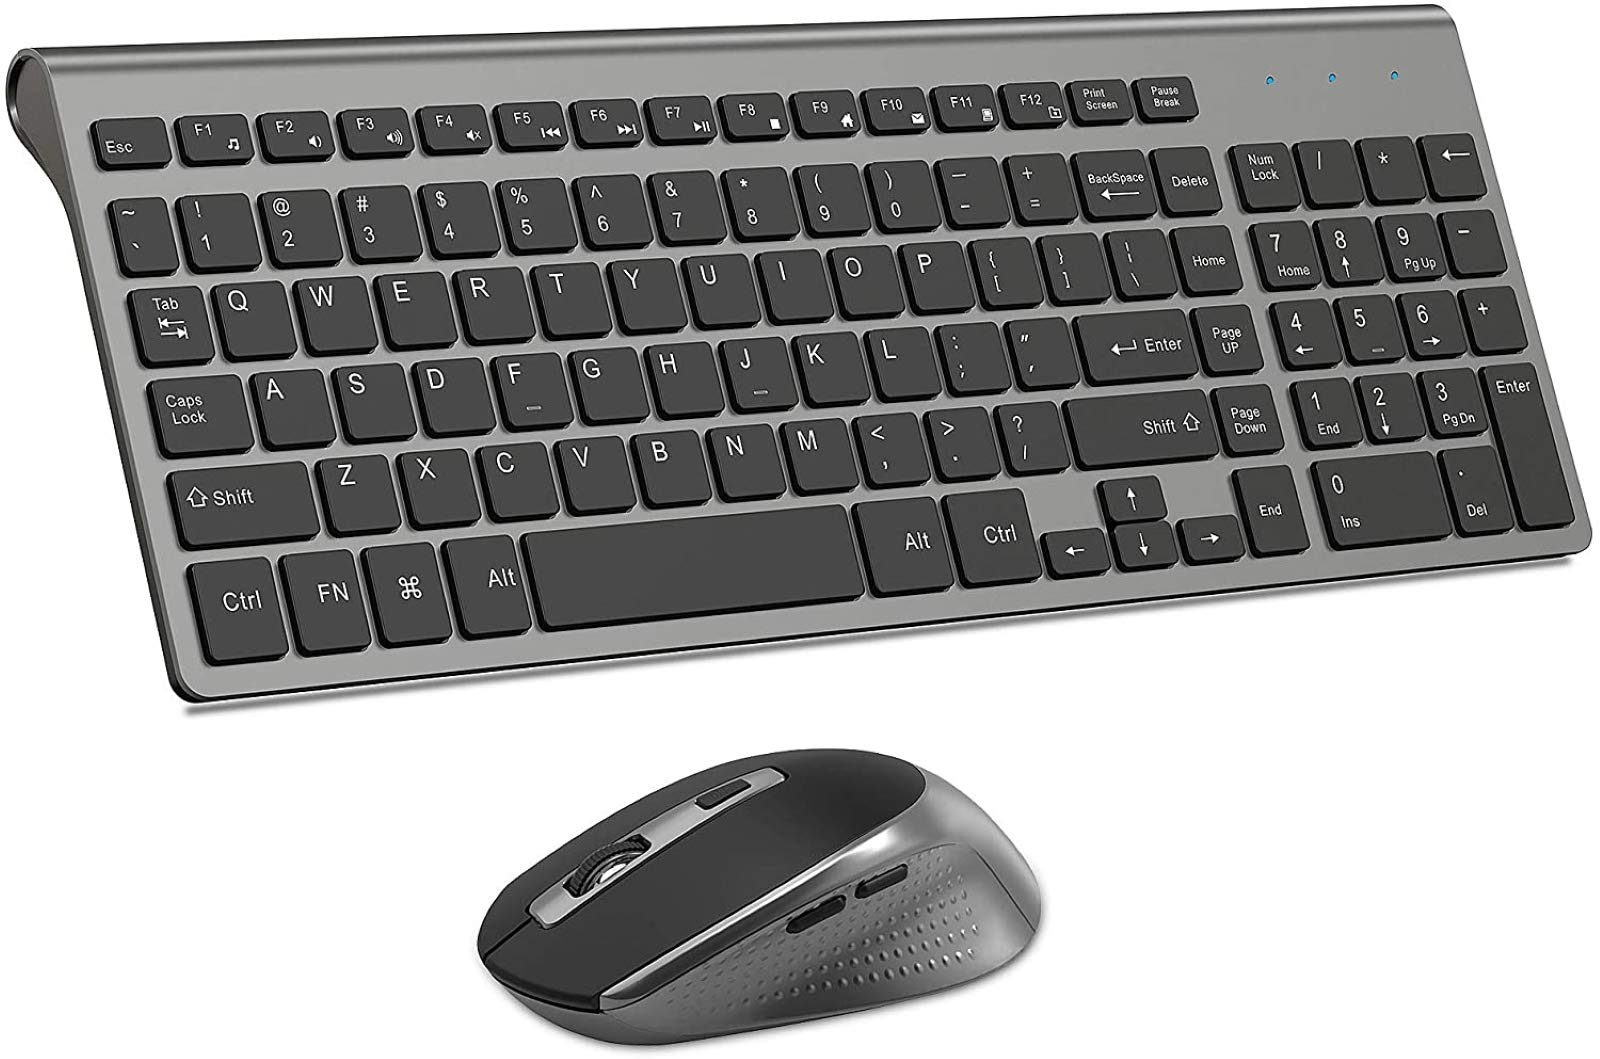 Wireless Keyboard Mouse Combo, J JOYACCESS Cordless Keyboard and Mouse Set, 2.4G Ergonomic Computer Keyboard Mouse for PC,Windows, Computer, Laptop, Desktop, Chromebook,Mac-GreyWireless Keyboard and Mouse, J JOYACCESS USB Slim Wireless Keyboard Mouse with Numeric Keypad Compatible with iMac Mac PC Laptop Tablet Computer Windows (Silver White)
